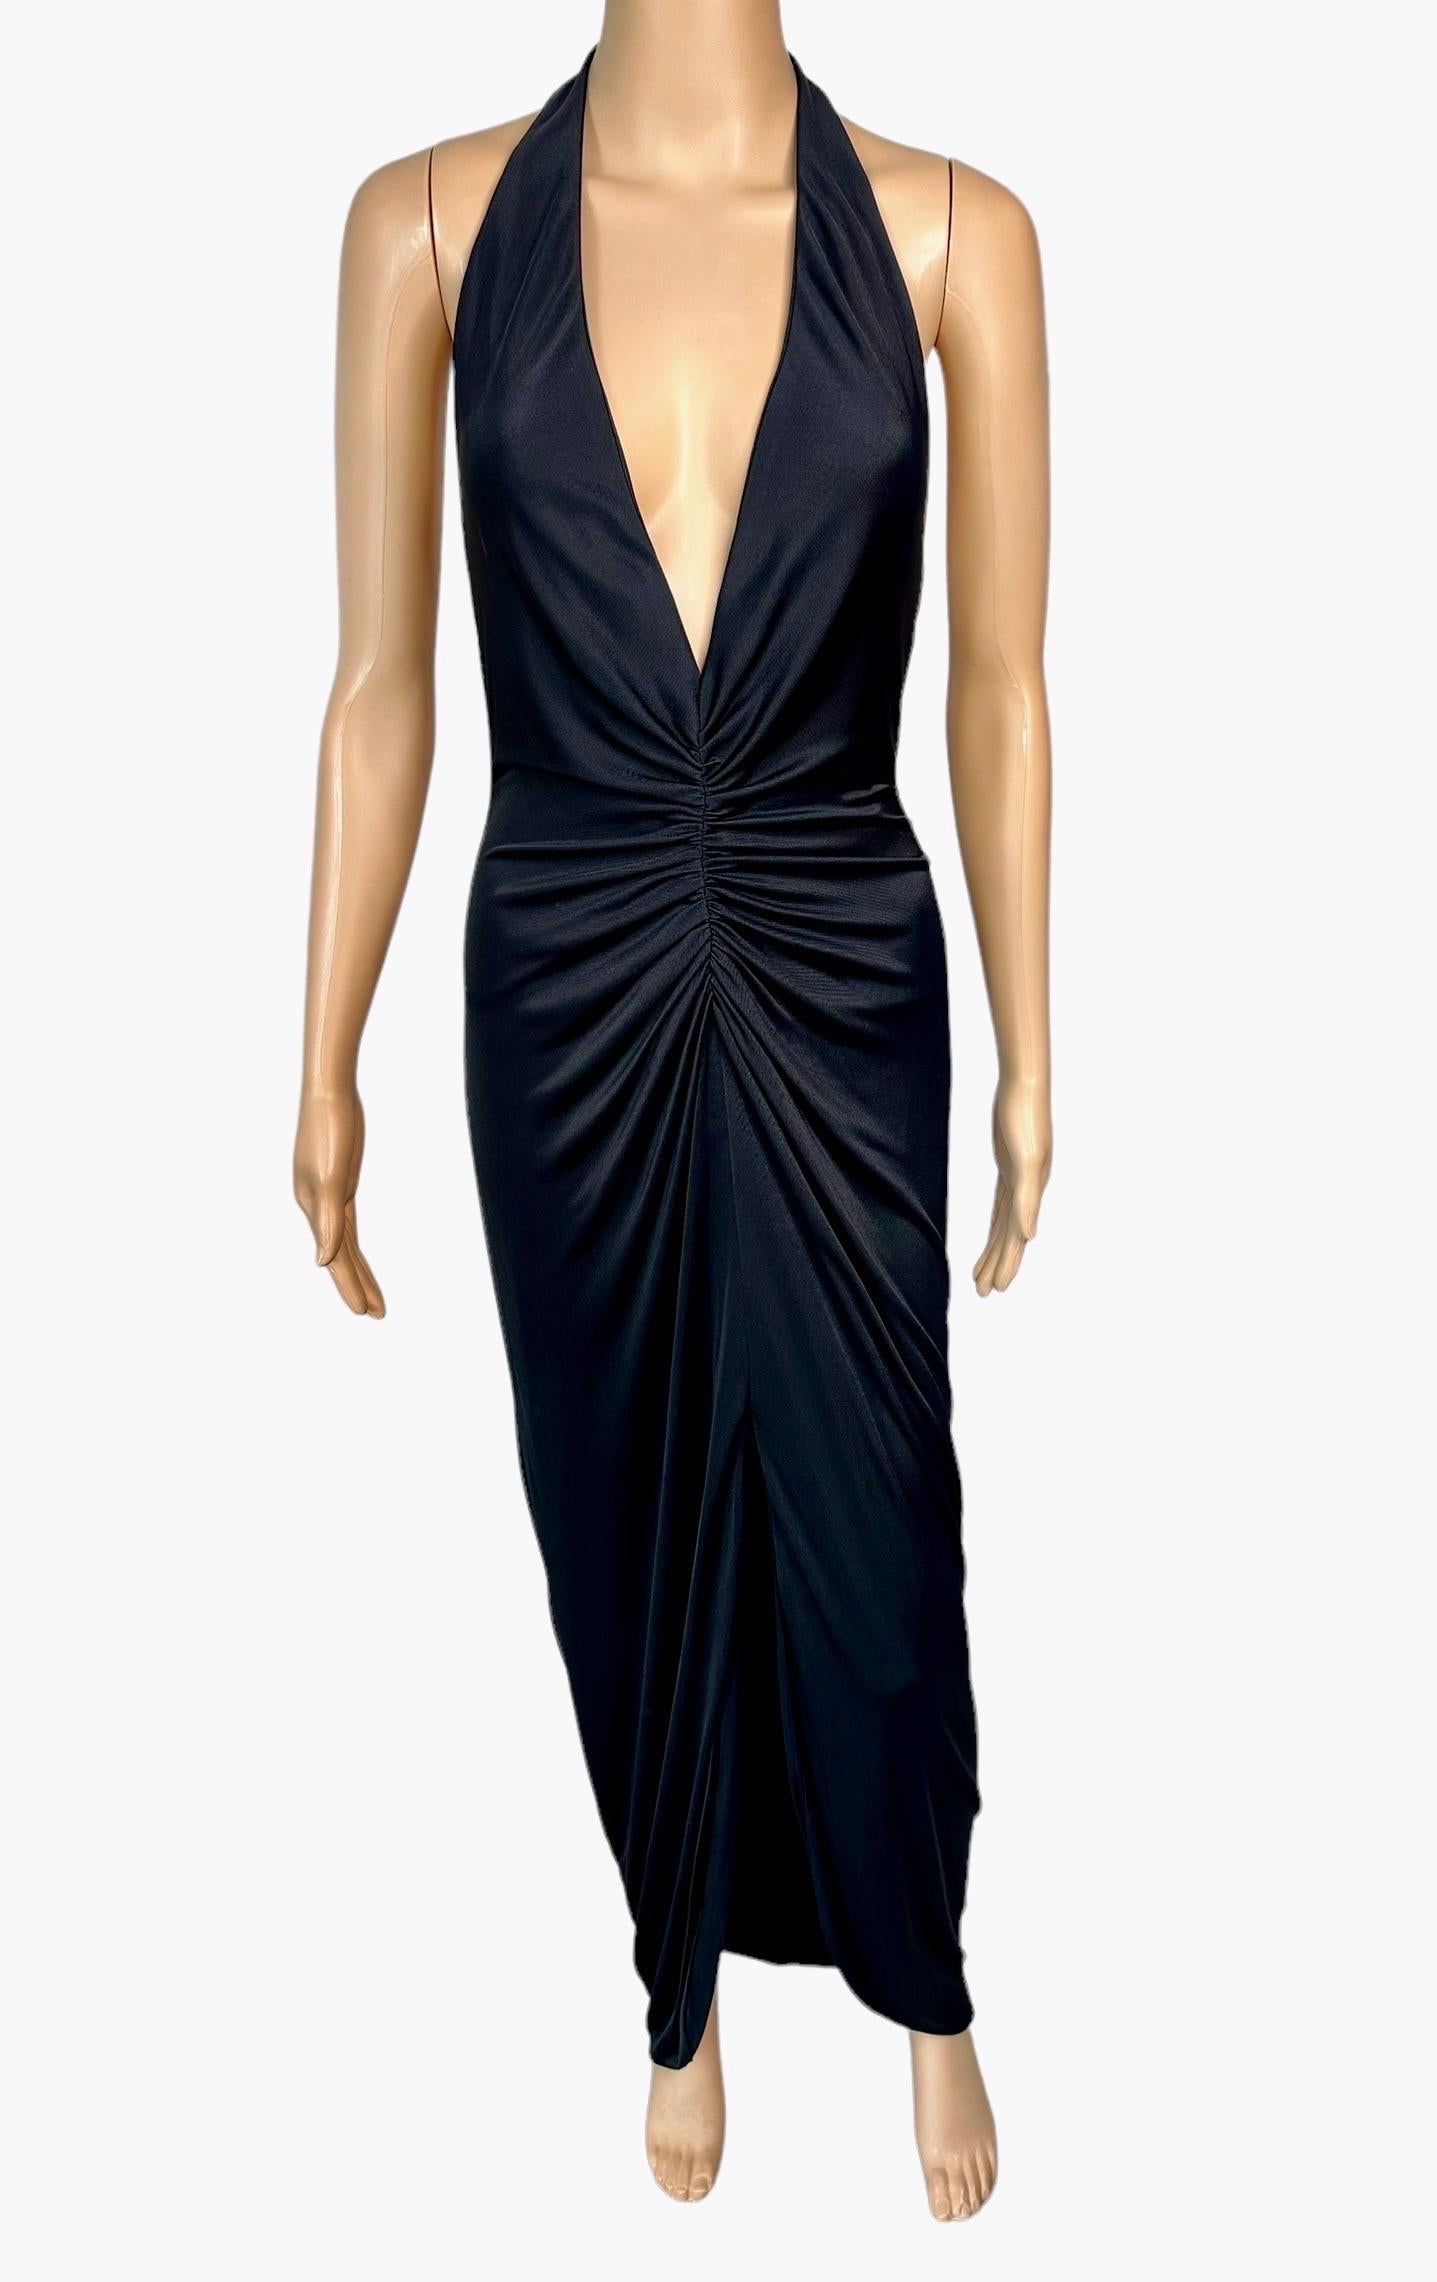 Versace S/S 2005 Runway Plunging Hi-Low Ruched Open Back Evening Dress Gown For Sale 4